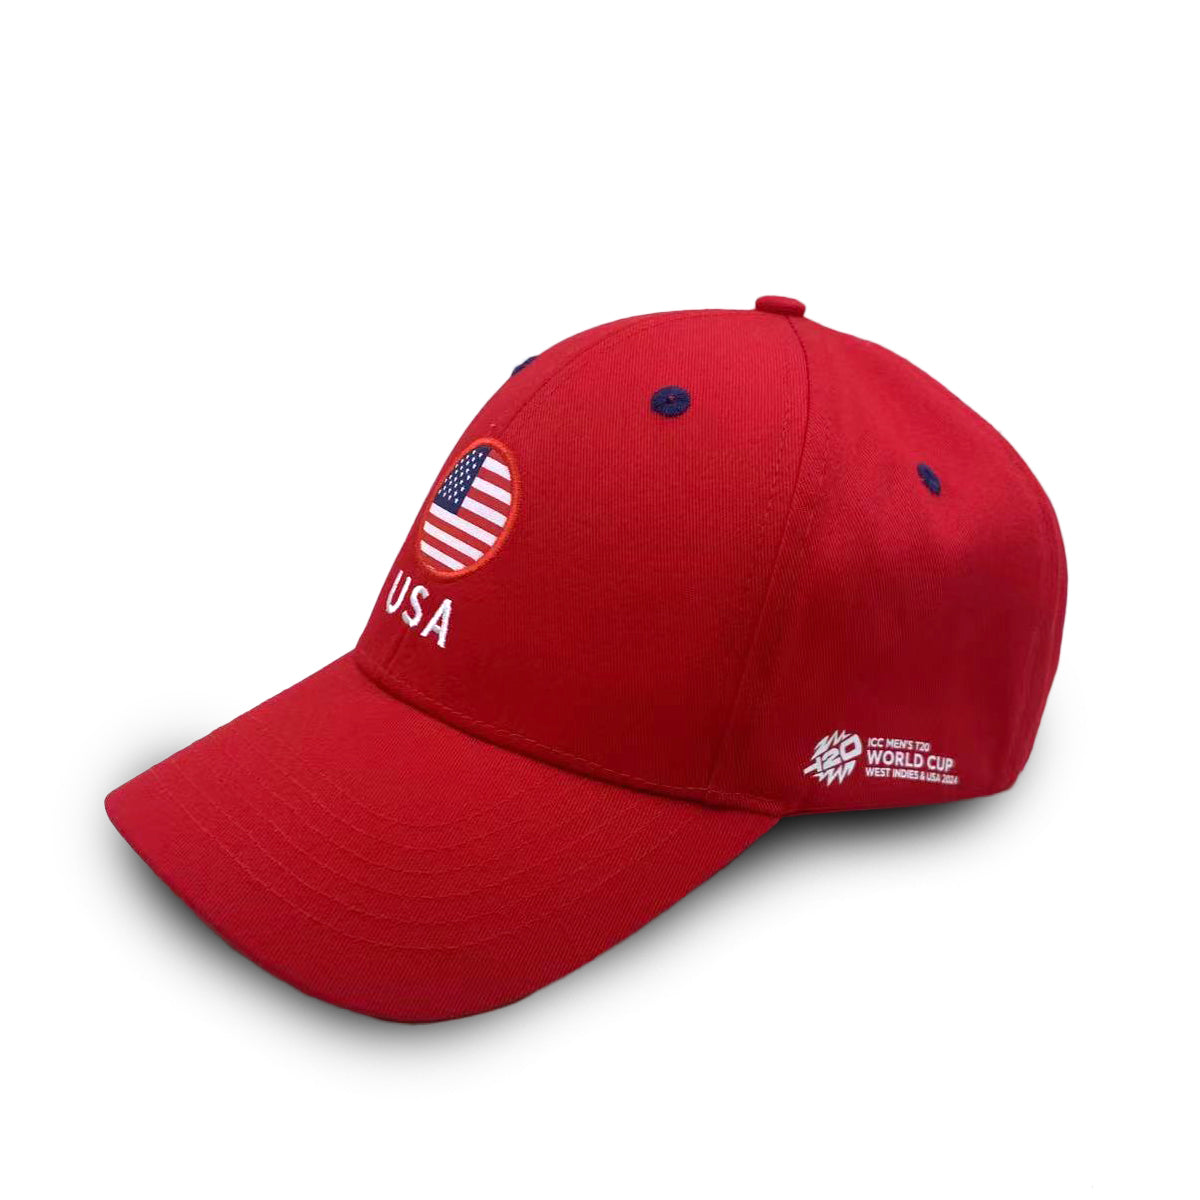 ICC T20 World Cup USA Flag Red Cap